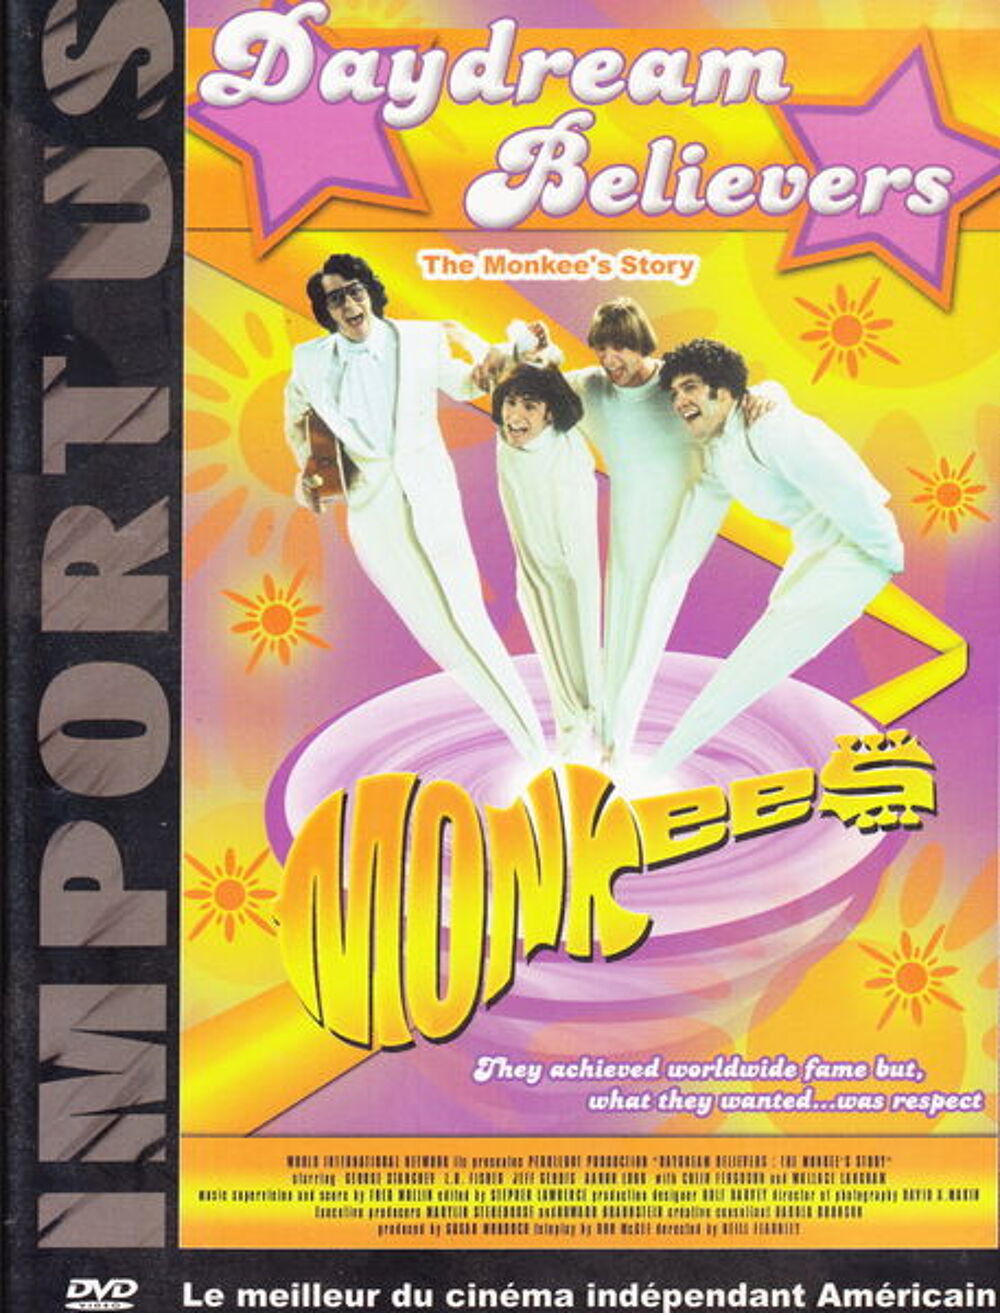 DVD Daydream Believers, The Monkee's Story
DVD et blu-ray